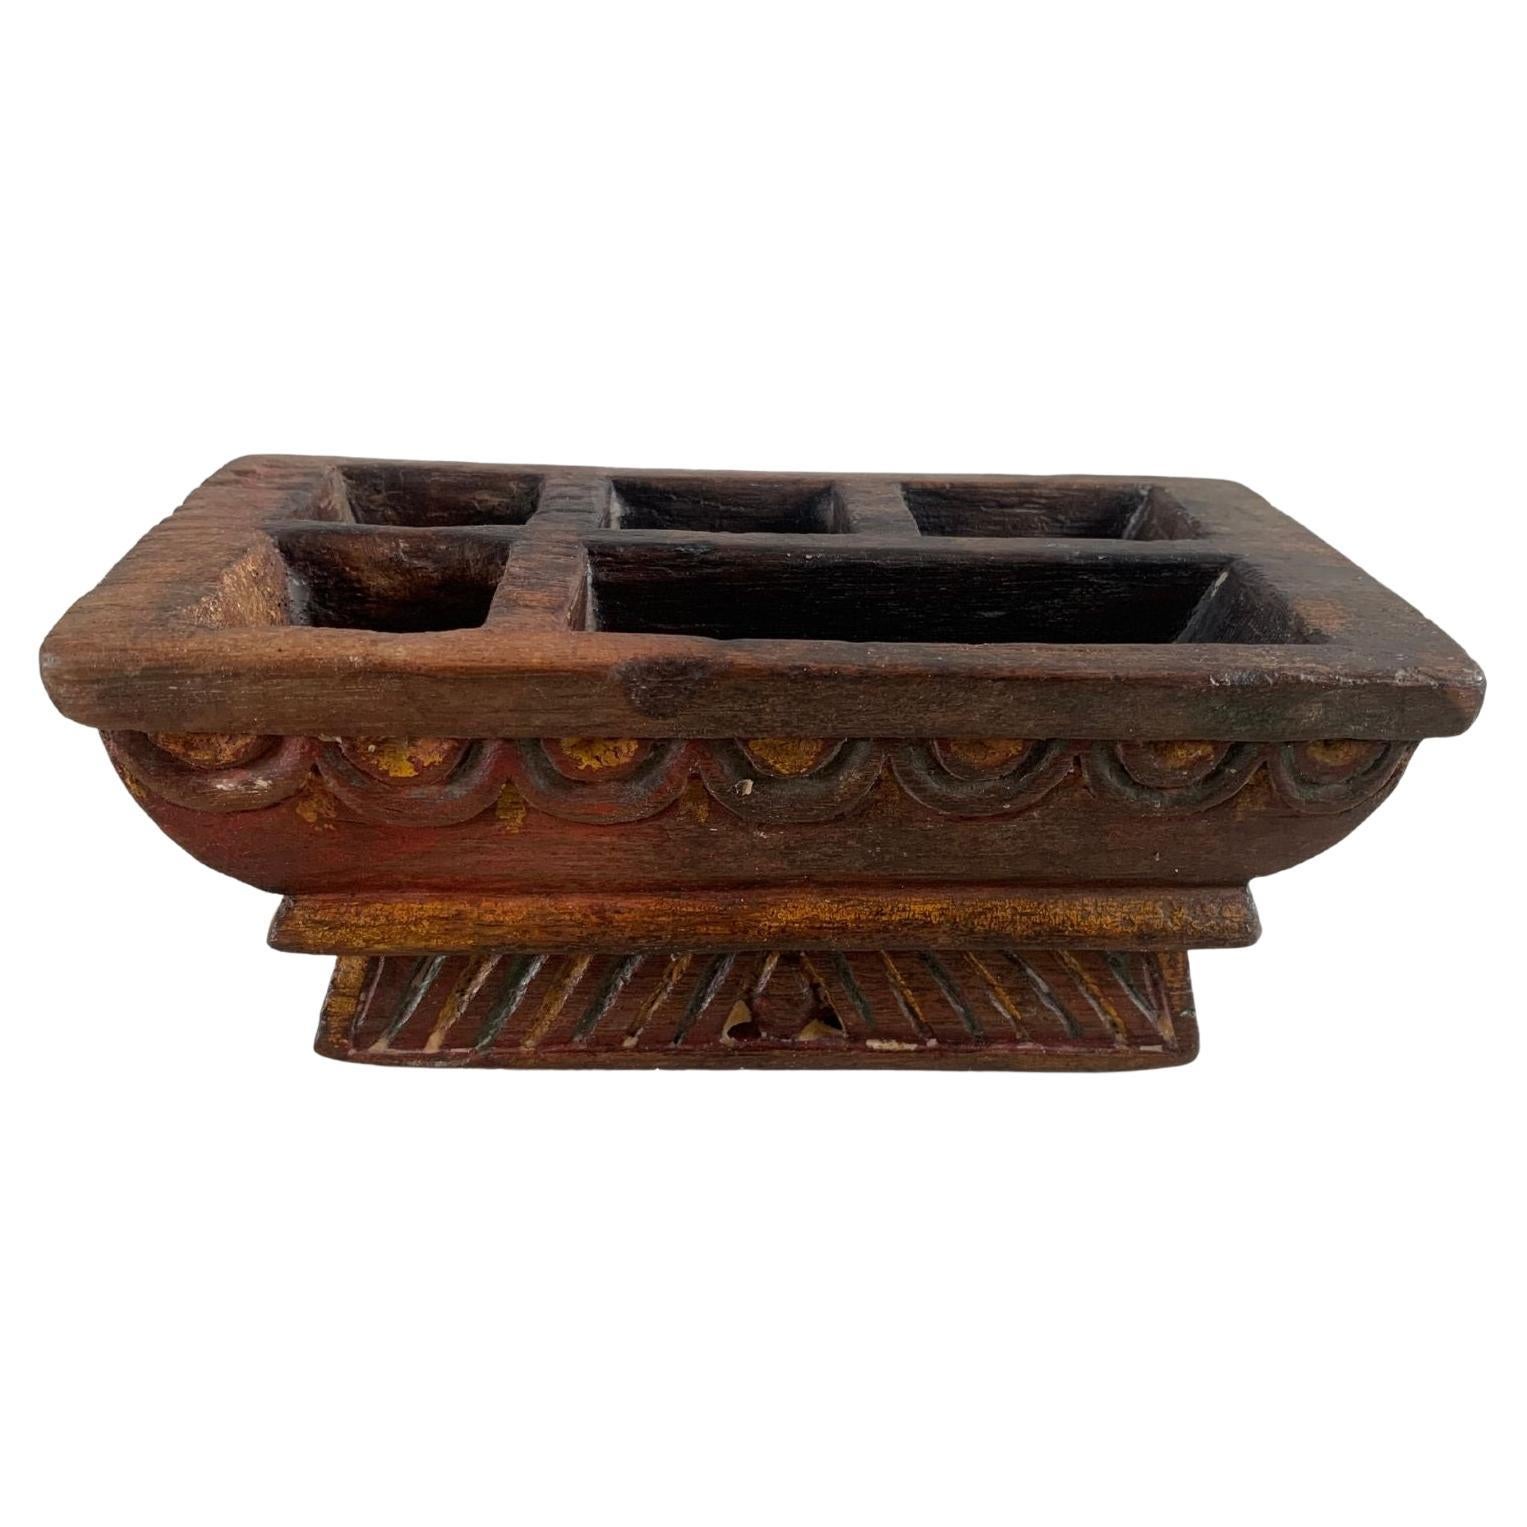 Betel Nut Box from Java with Polychromed Finish, Indonesia, c. 1900 For Sale